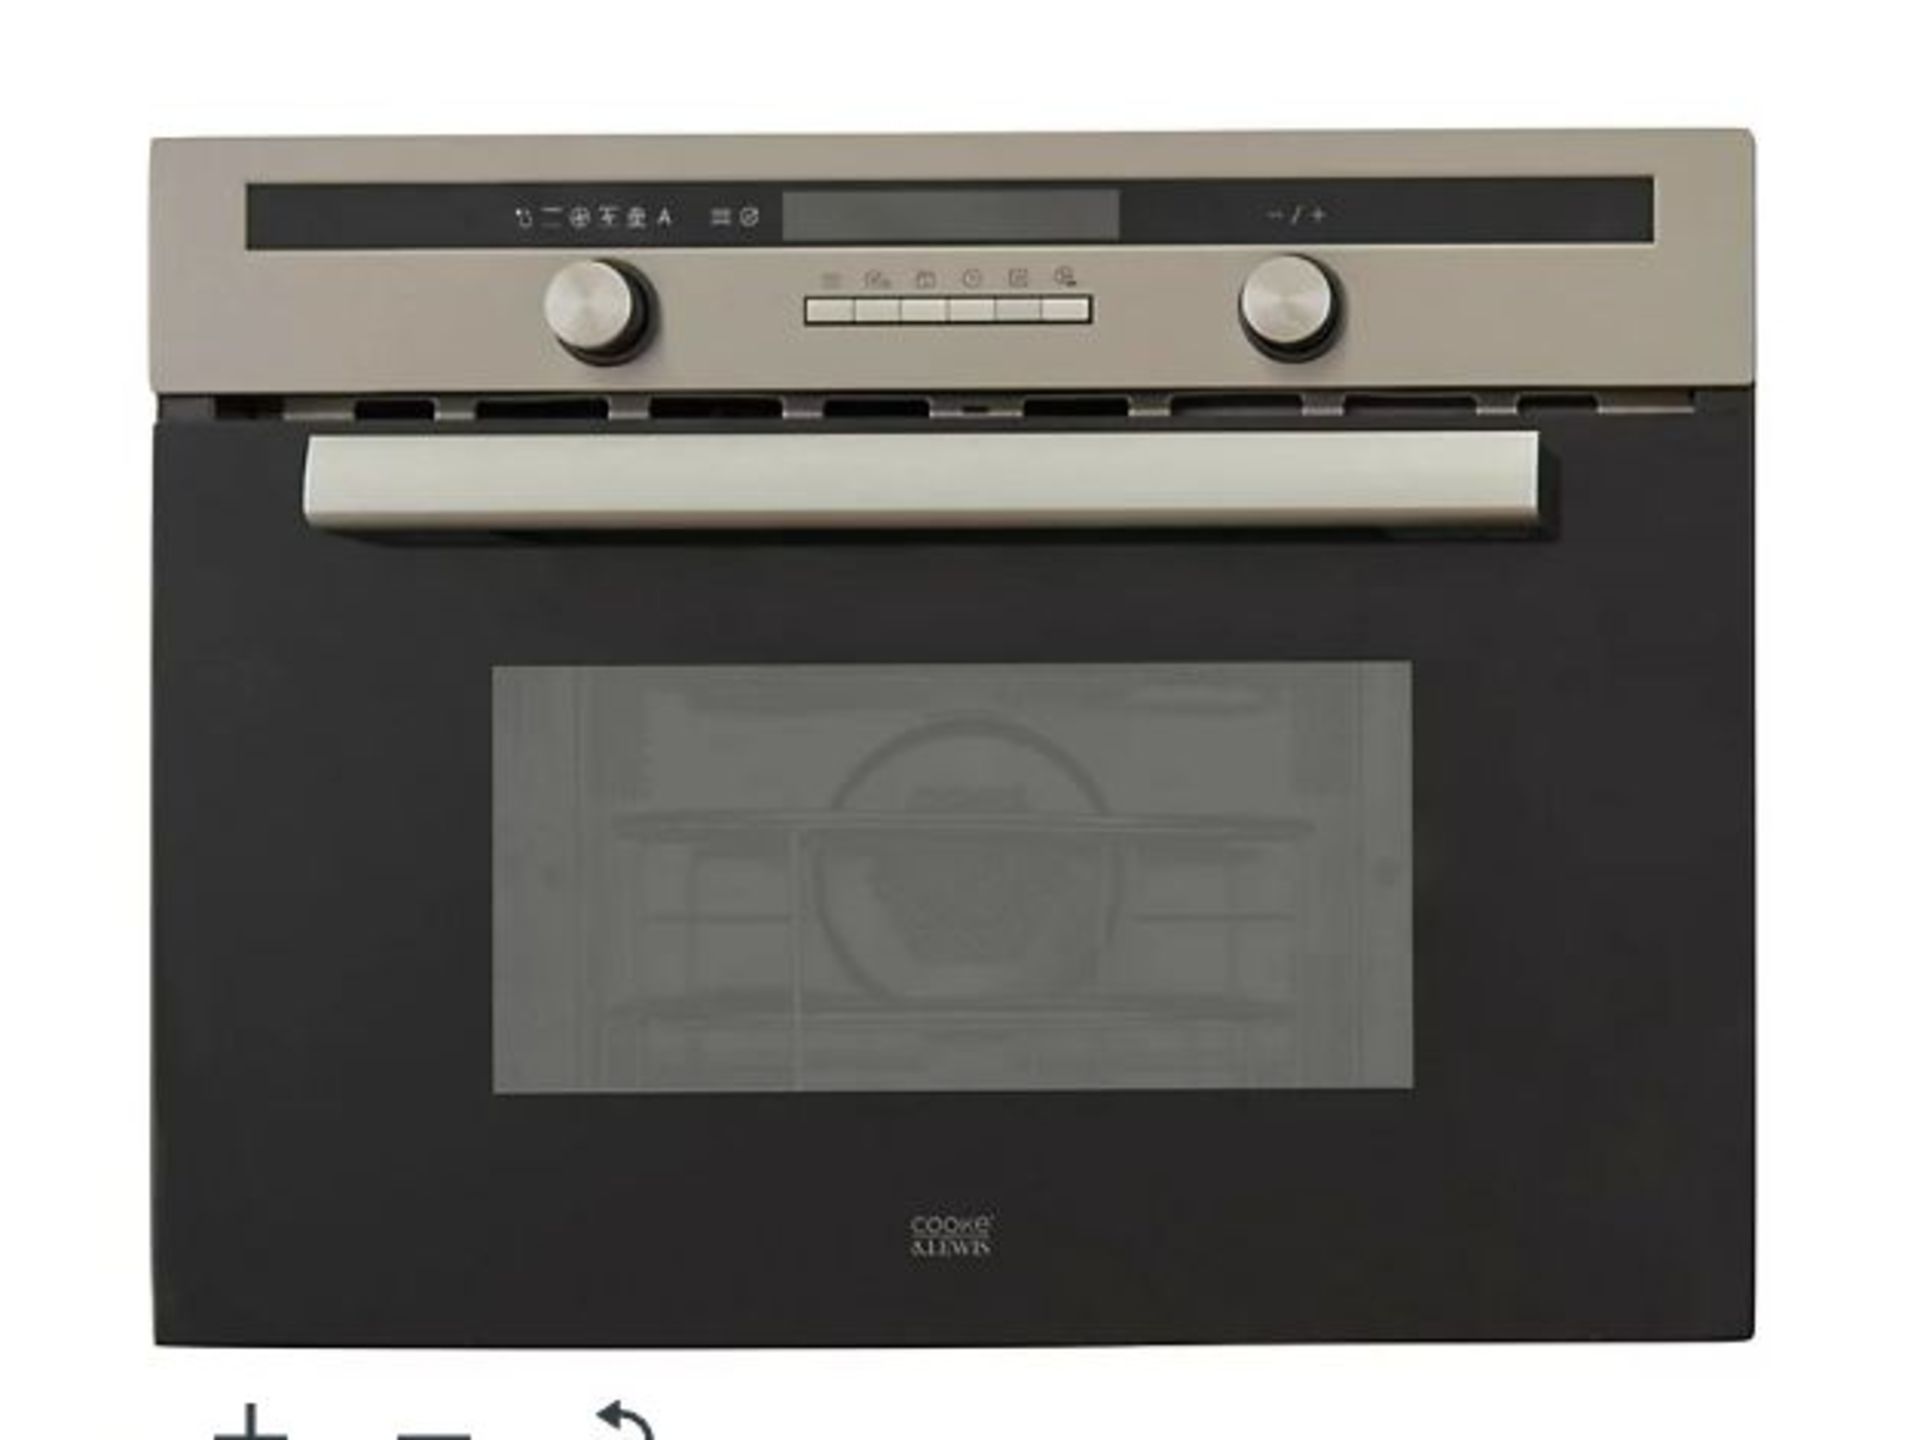 Cooke & Lewis CLCPST Built-in Compact Oven - Stainless steel. - ER45. Enjoy cooking again with